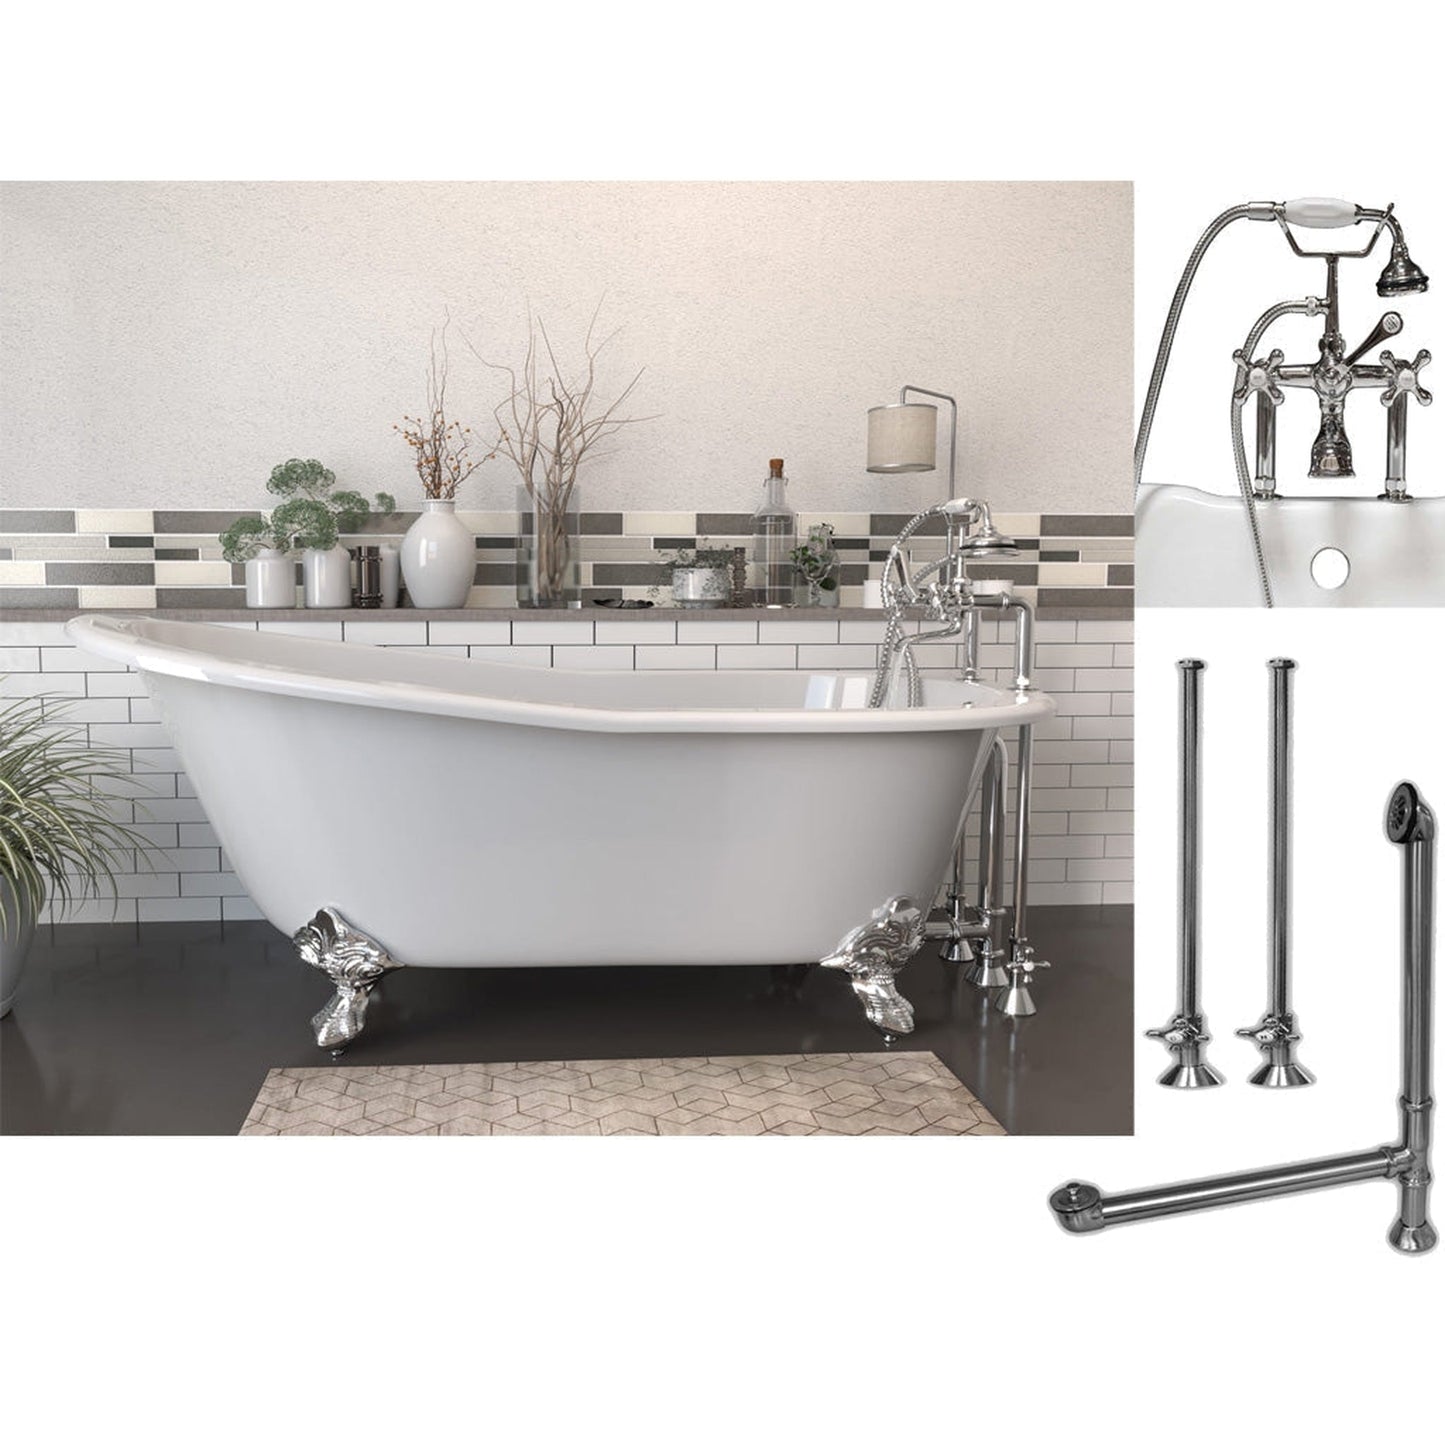 Cambridge Plumbing 61" White Cast Iron Clawfoot Bathtub With Deck Holes And Complete Plumbing Package Including 6” Riser Deck Mount Faucet, Supply Lines, Drain And Overflow Assembly In Polished Chrome